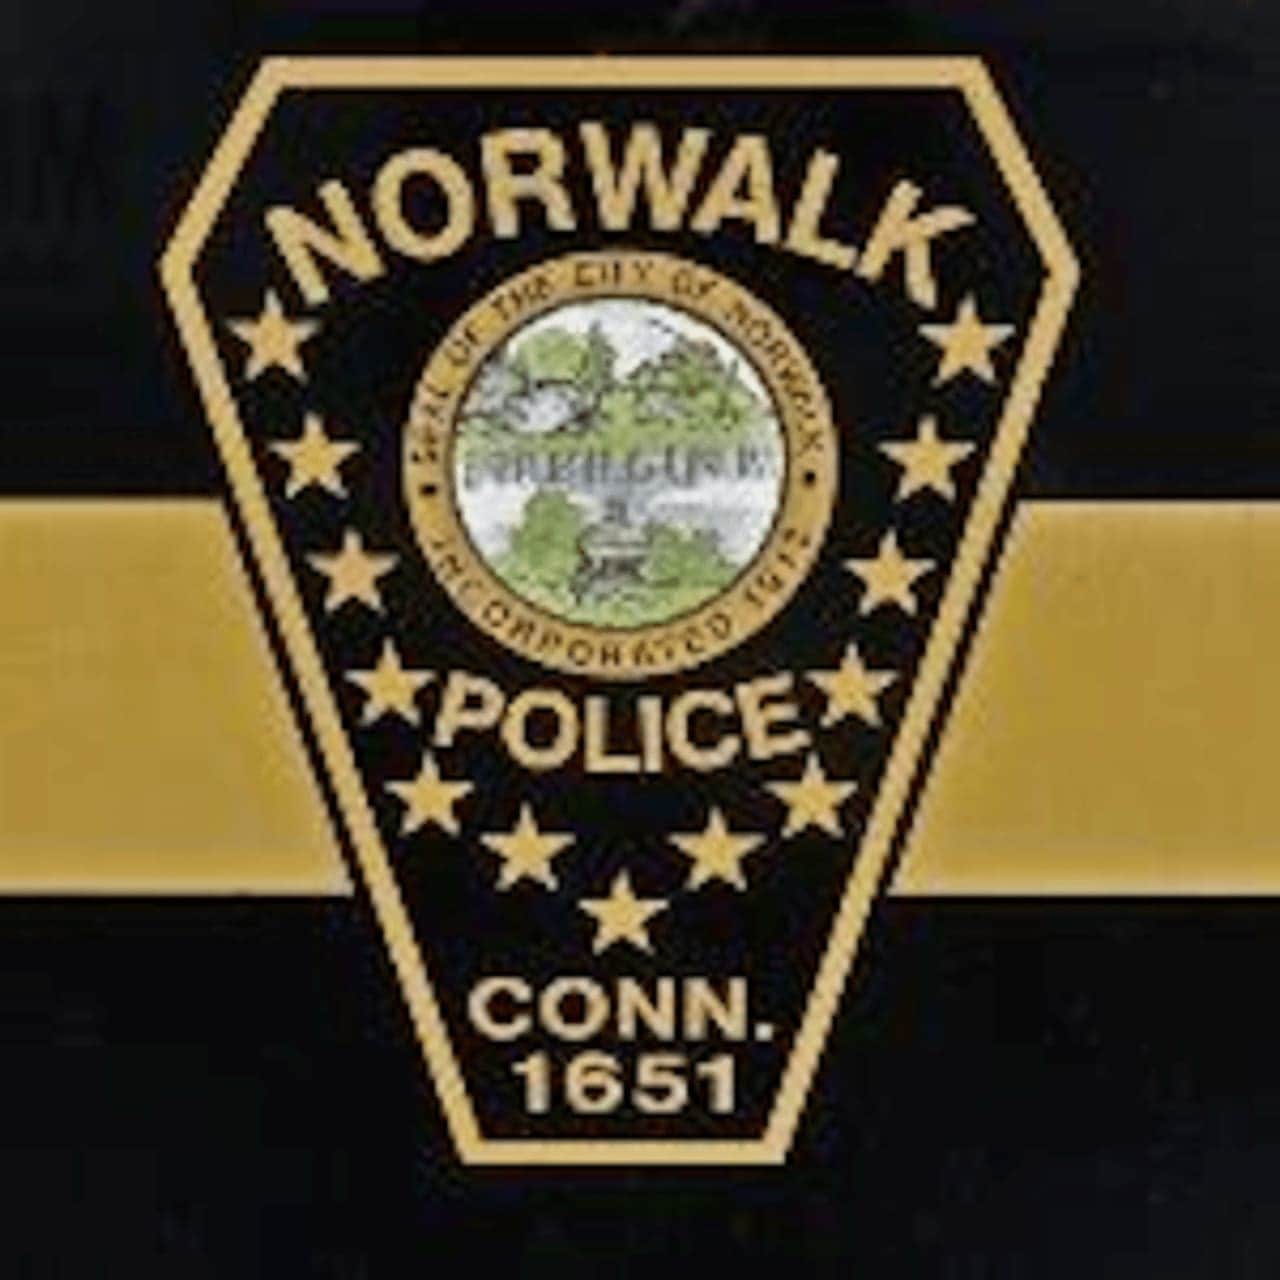 Two cars were reported stolen in the Rowayton section of Norwalk this week